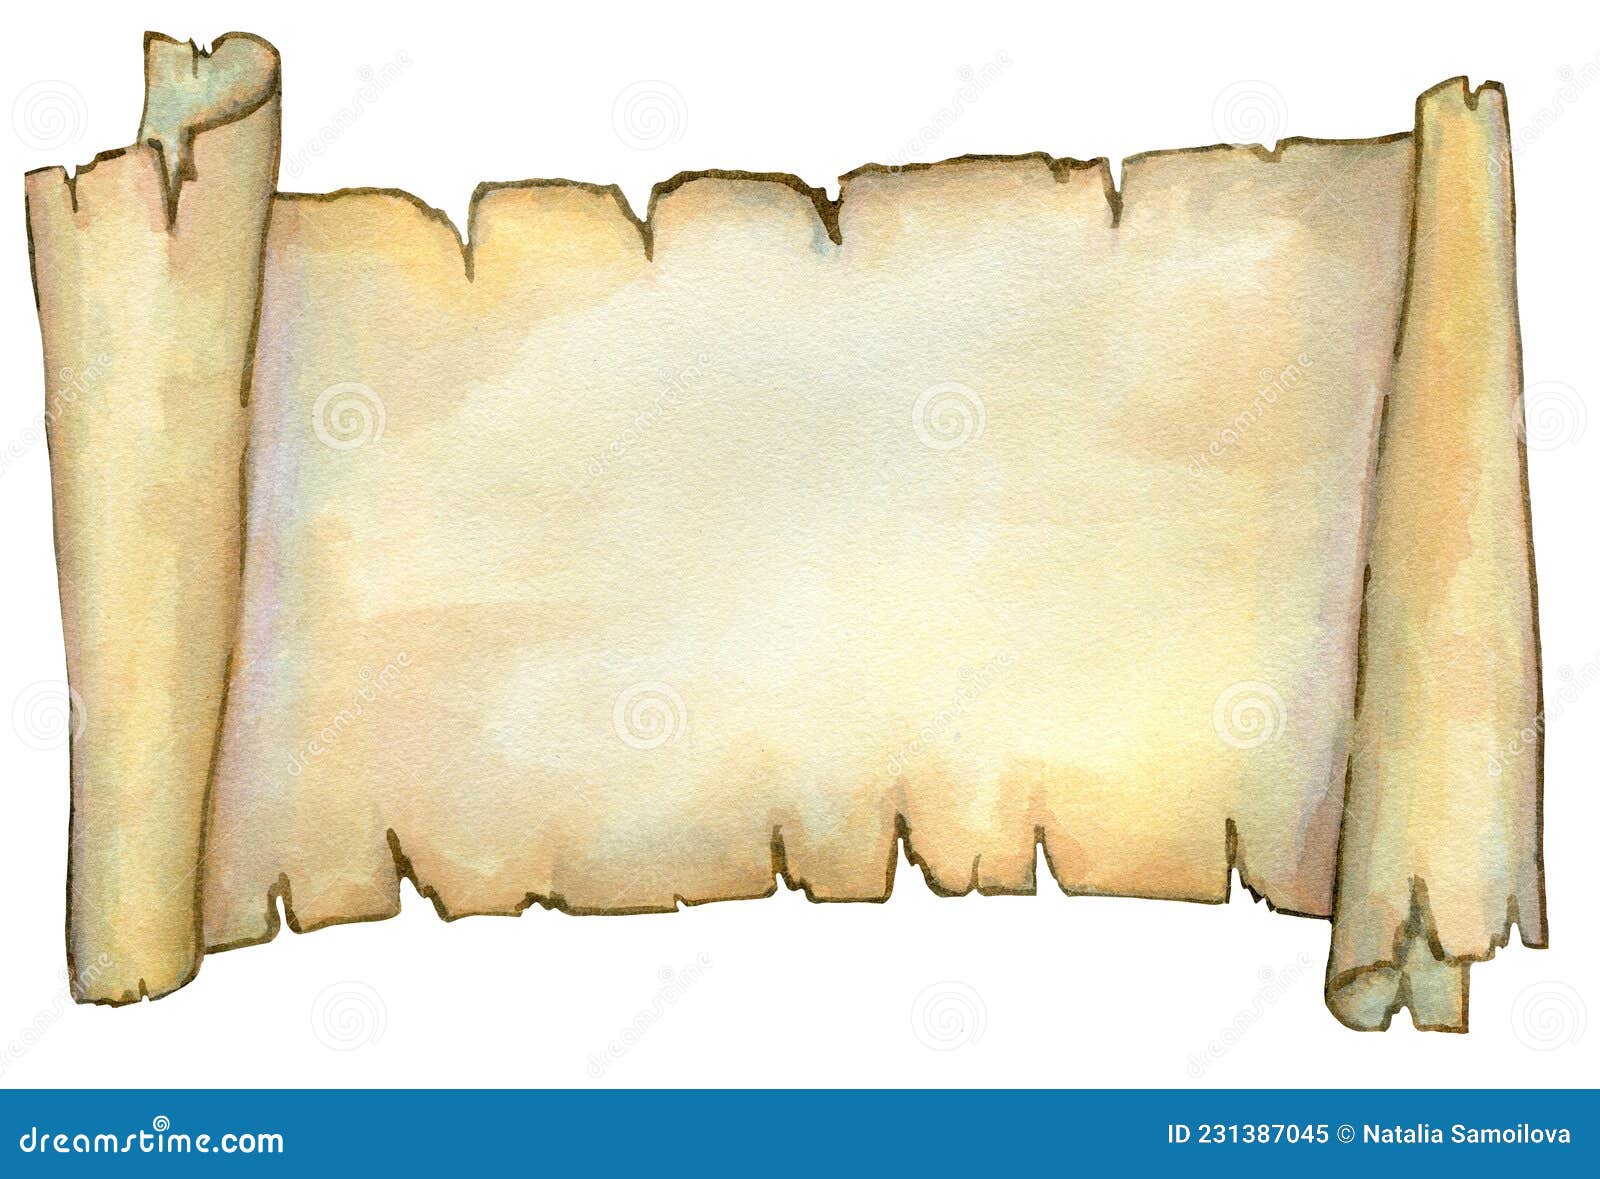 https://thumbs.dreamstime.com/z/old-sheet-paper-twisted-edges-old-paper-roll-parchment-original-background-texture-watercolour-old-sheet-231387045.jpg